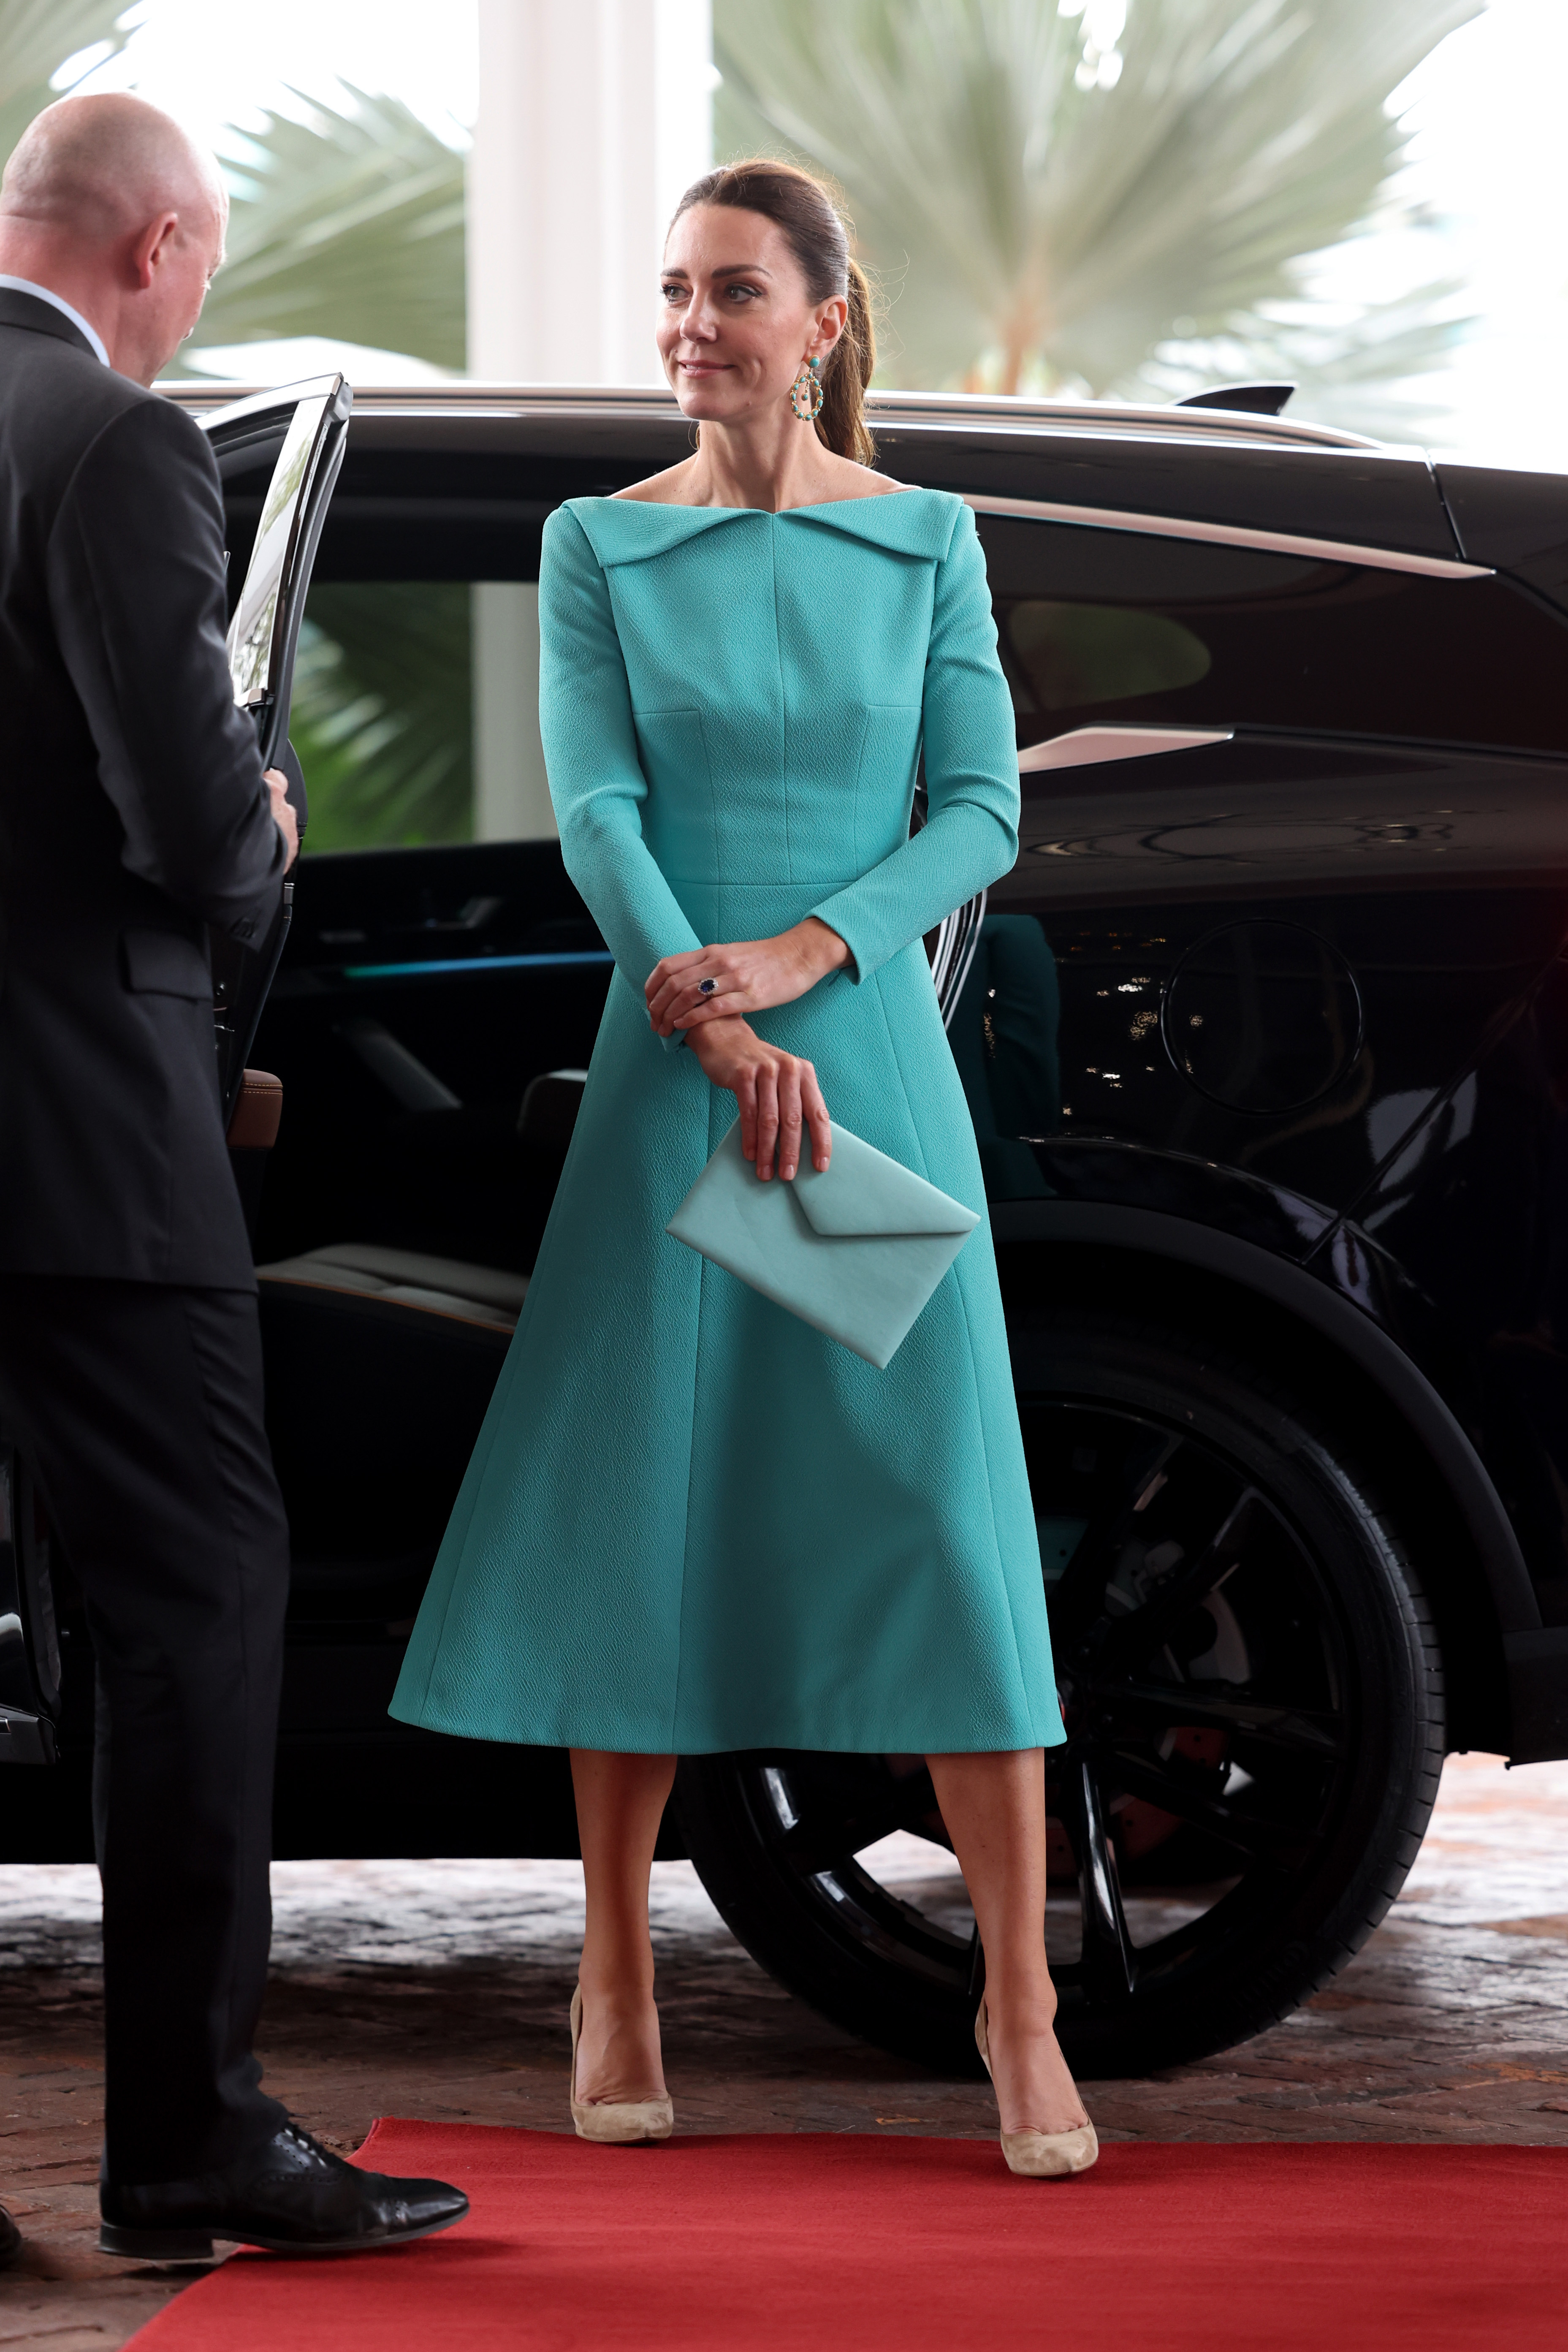 The Duchess of Cambridge arrives for a private meeting with the Prime Minister of the Bahamas Philip Brave Davis